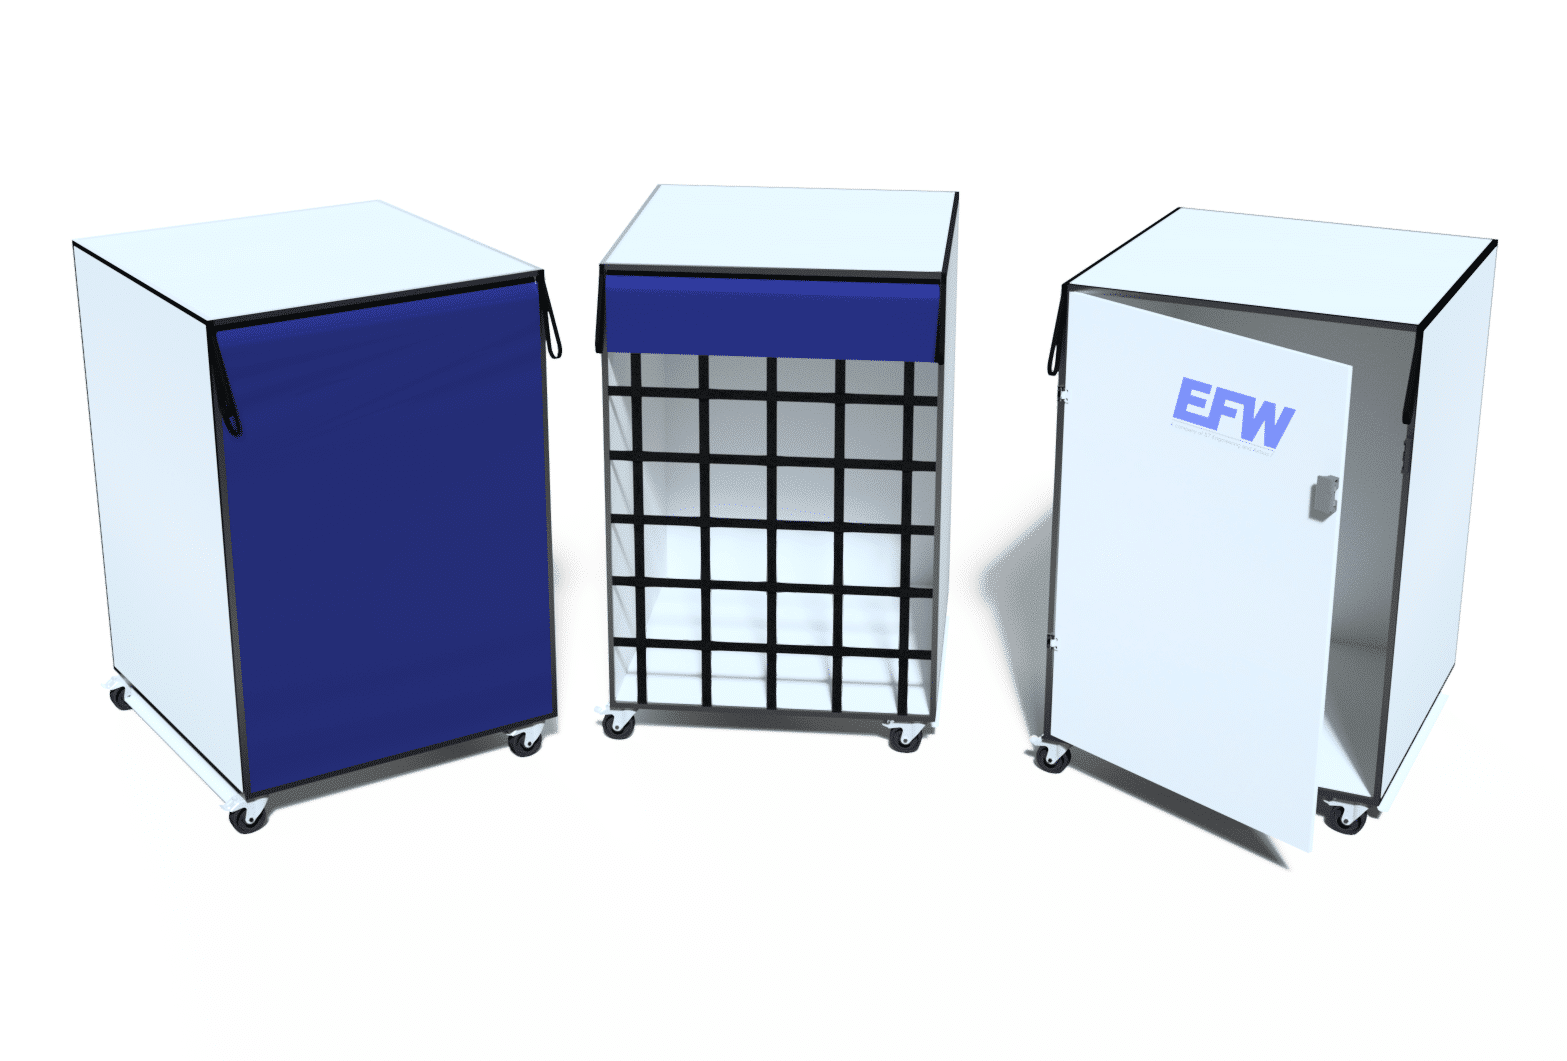 Rendering of EFW's proposed in-cabin cargo container boxes.